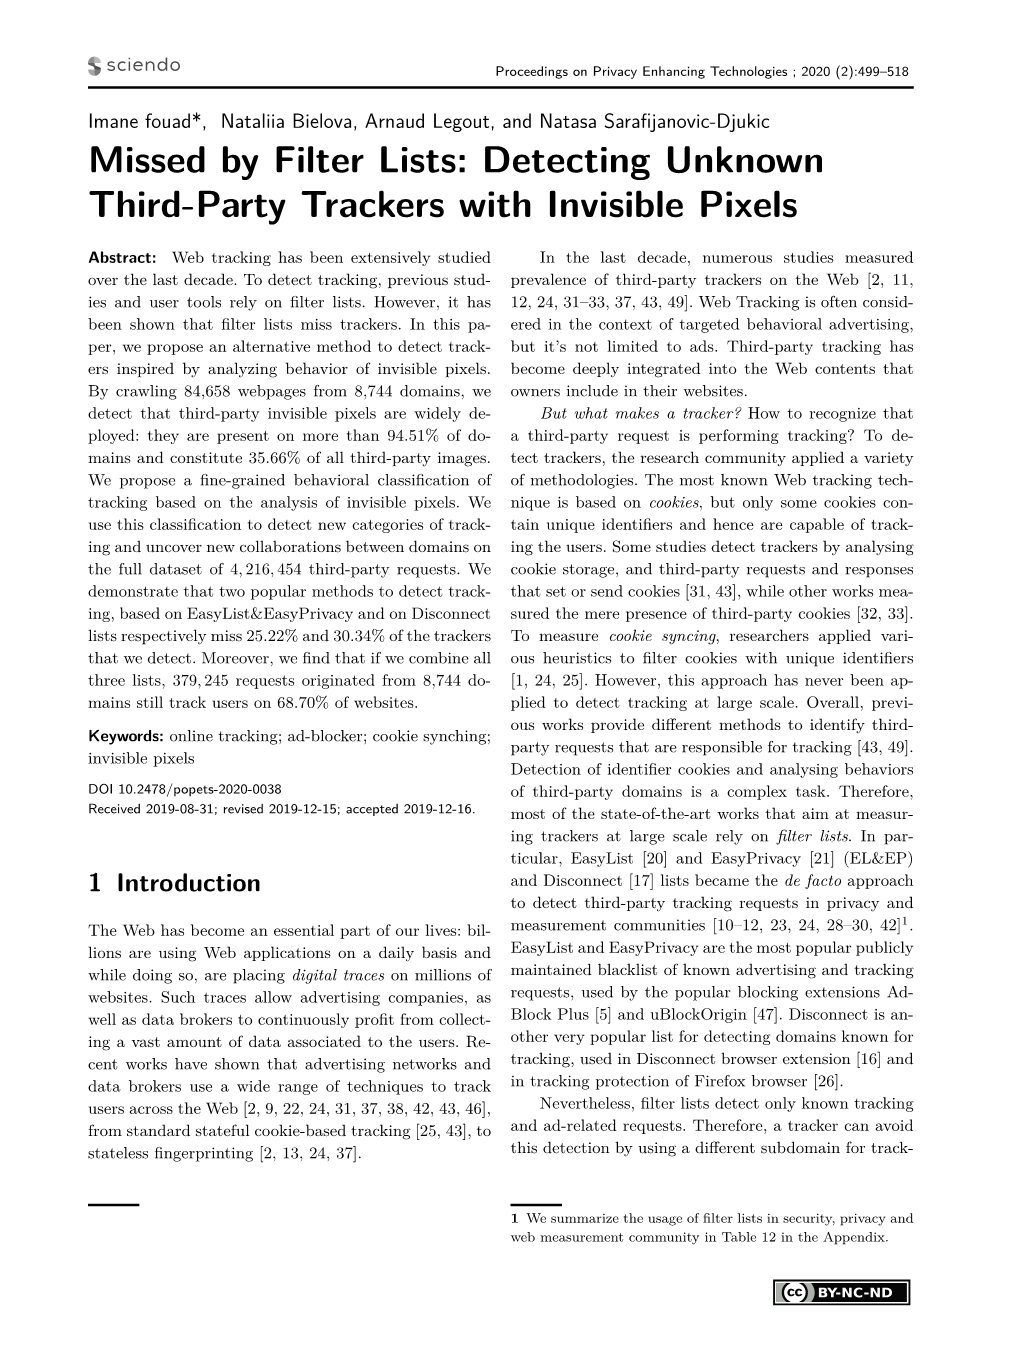 Missed by Filter Lists: Detecting Unknown Third-Party Trackers with Invisible Pixels